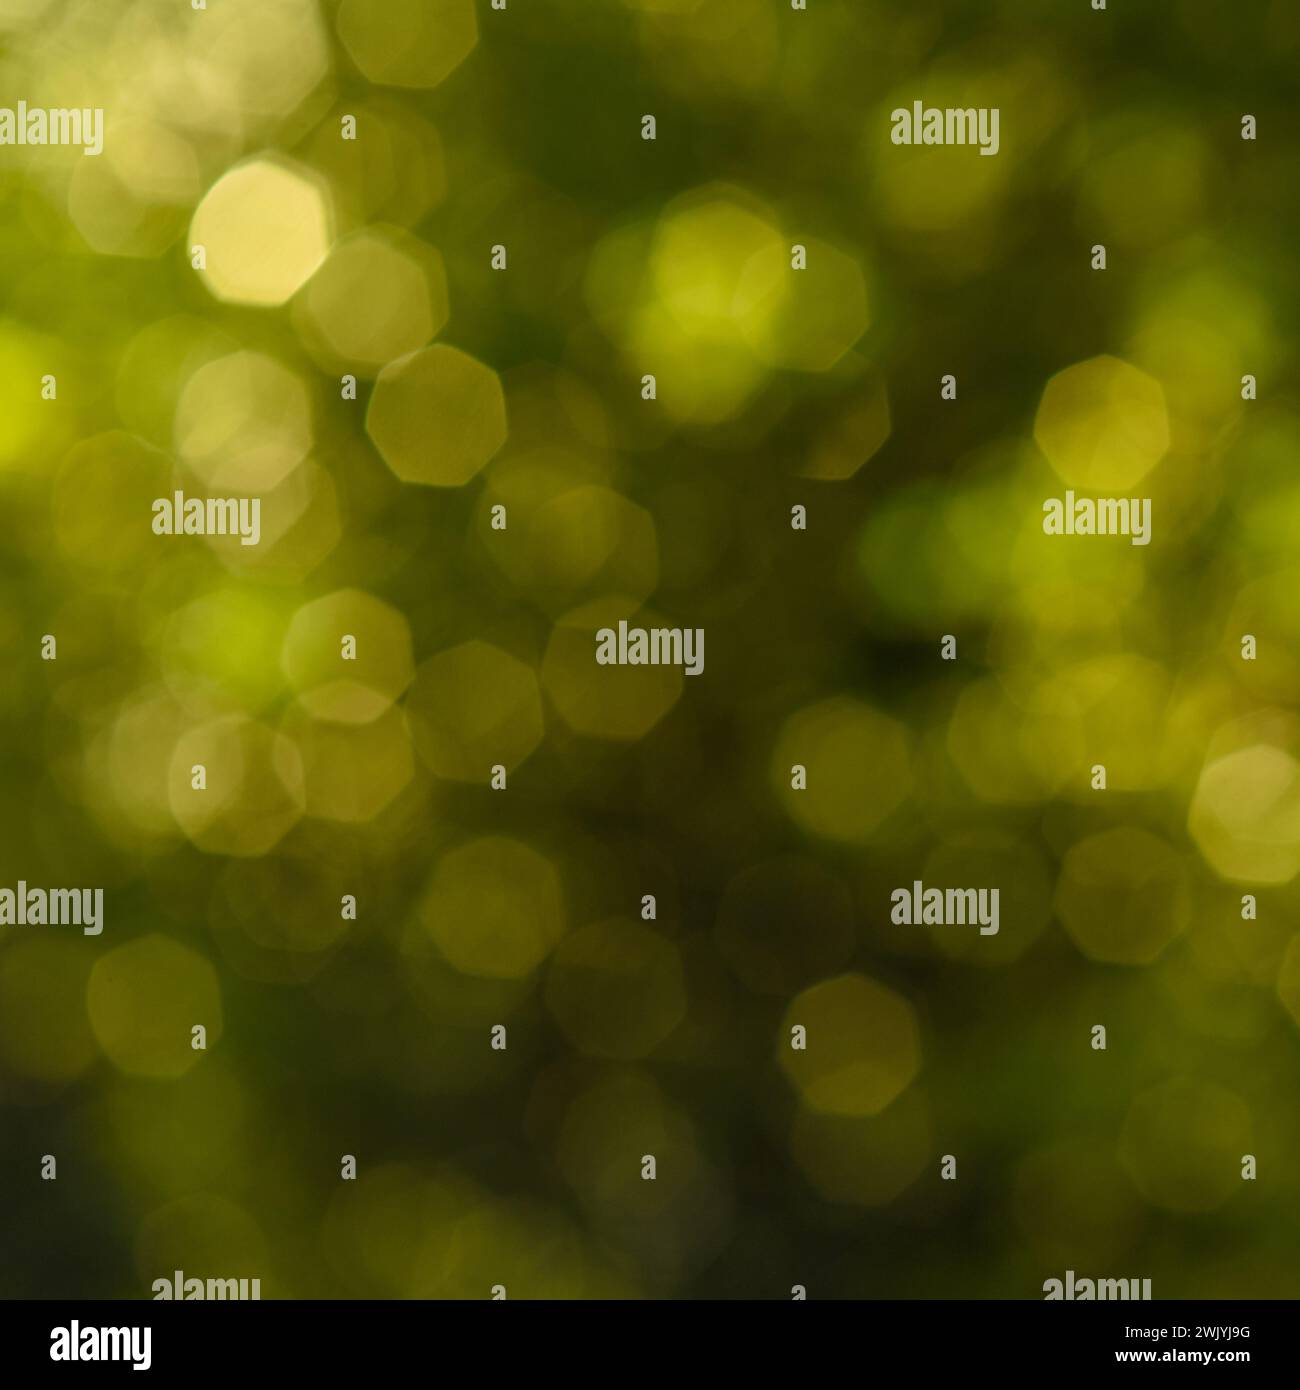 Abstract blurred green nature background with beautiful bokeh. Photographed outdoors using backlighting technique. Element of design. Stock Photo